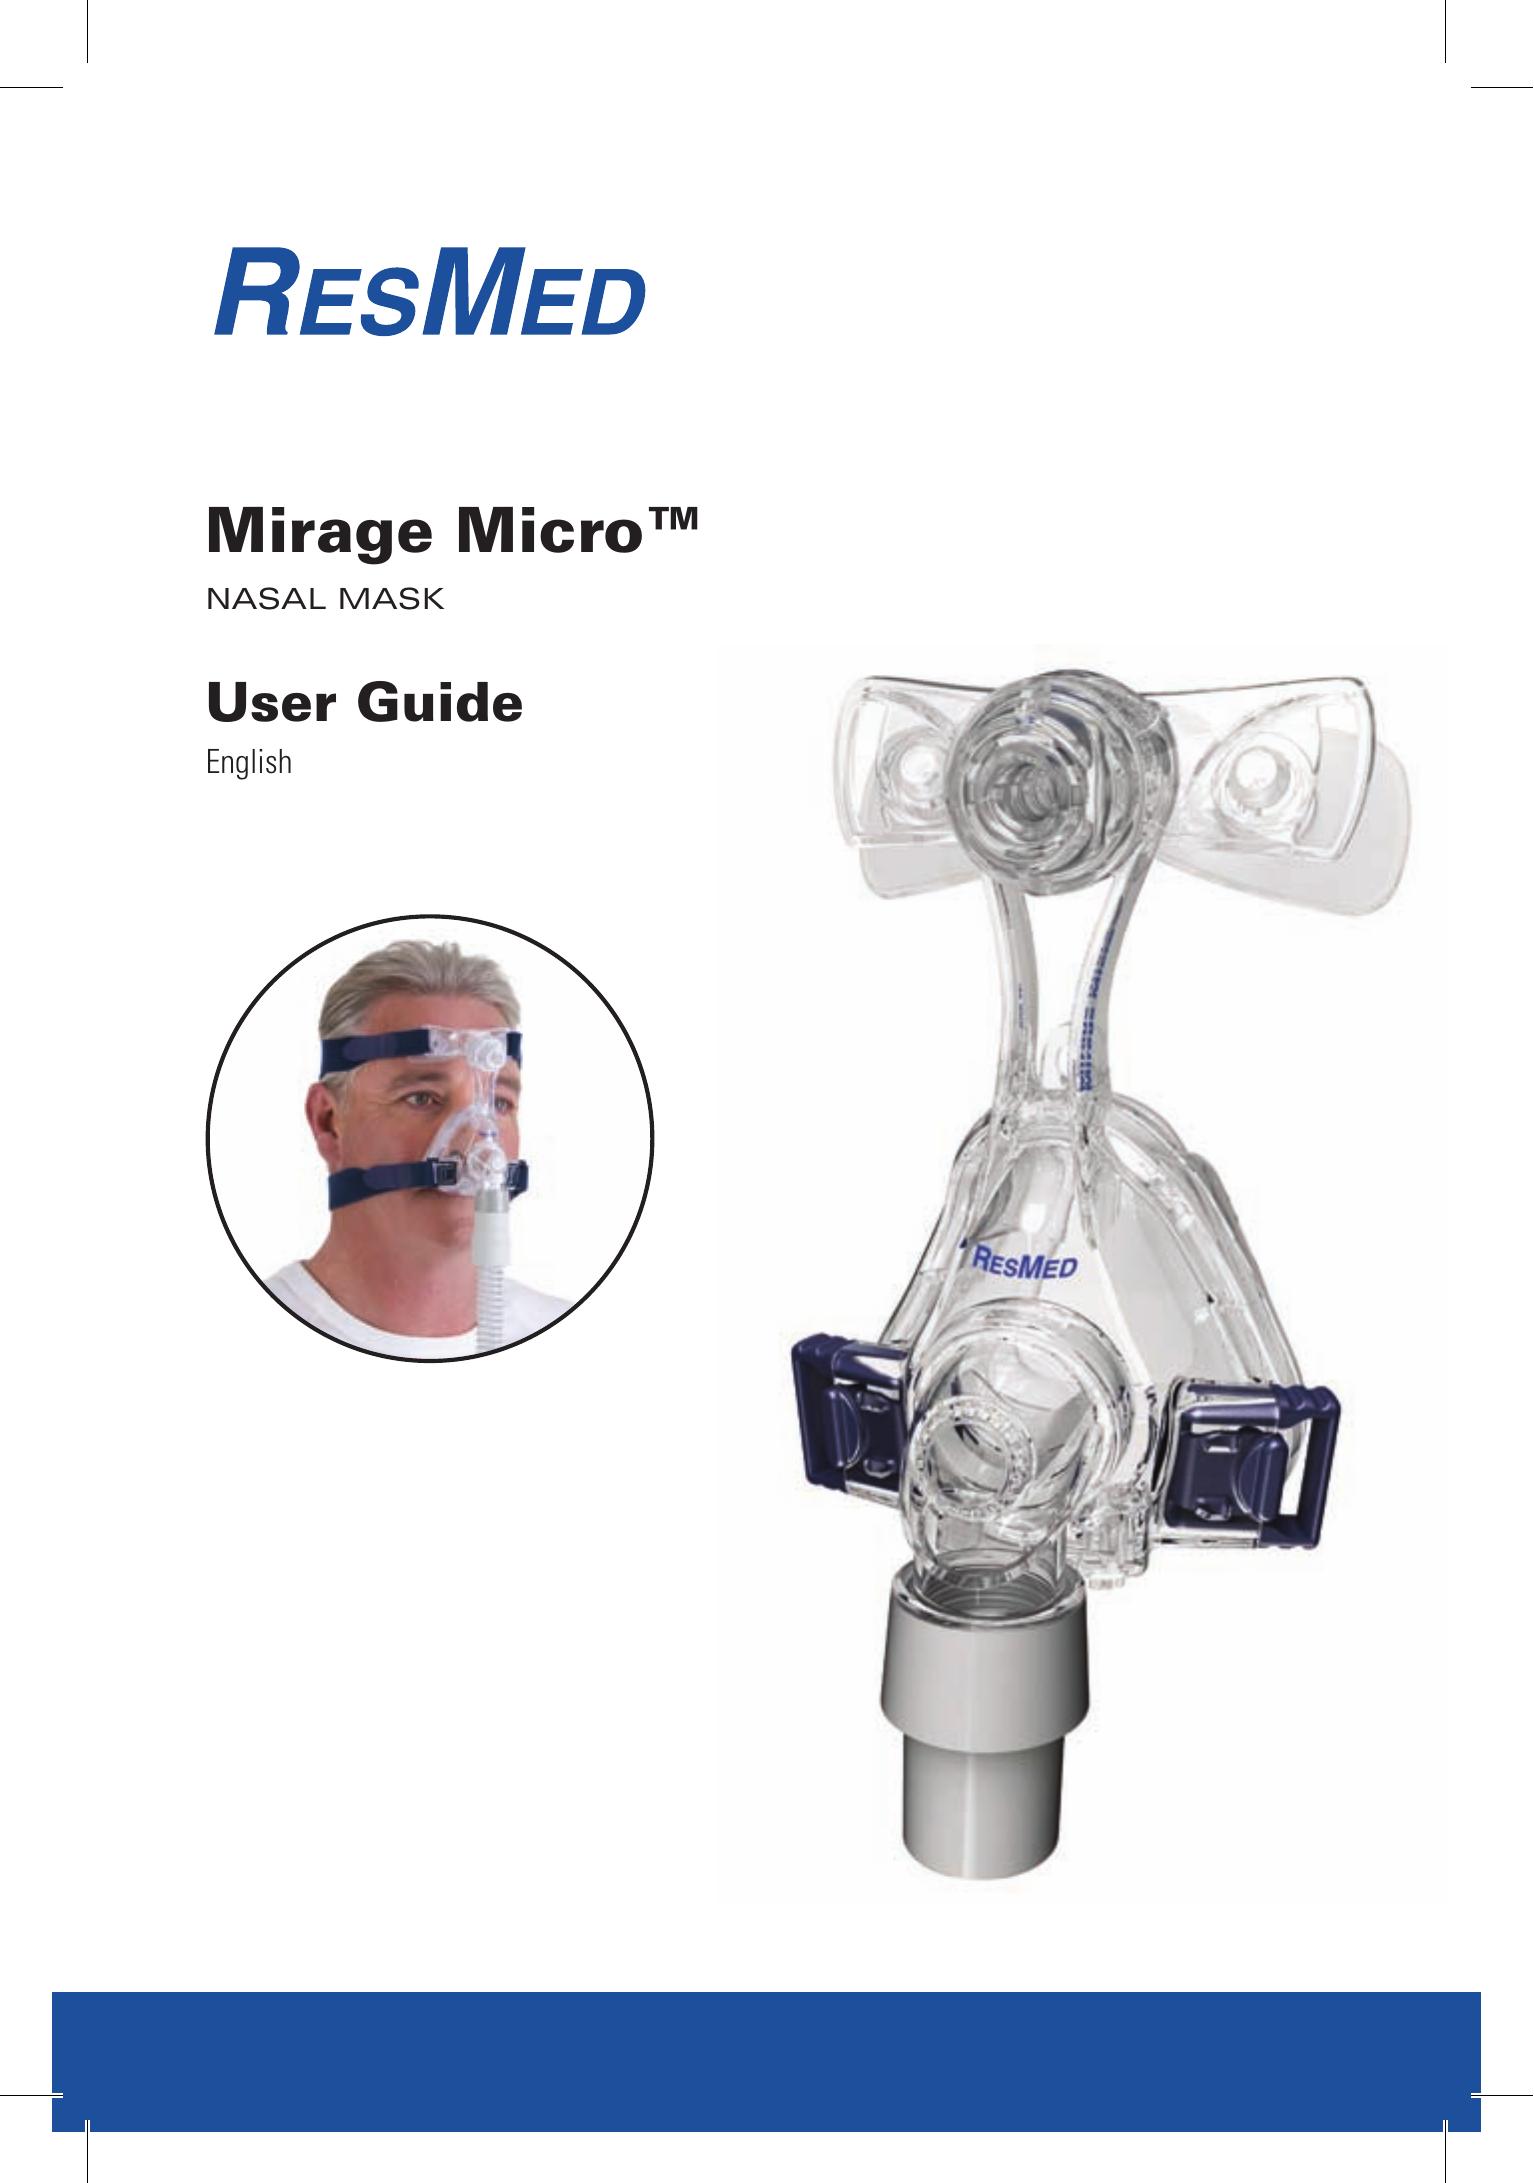 ResMed Mirage Micro Respiratory Product User Manual